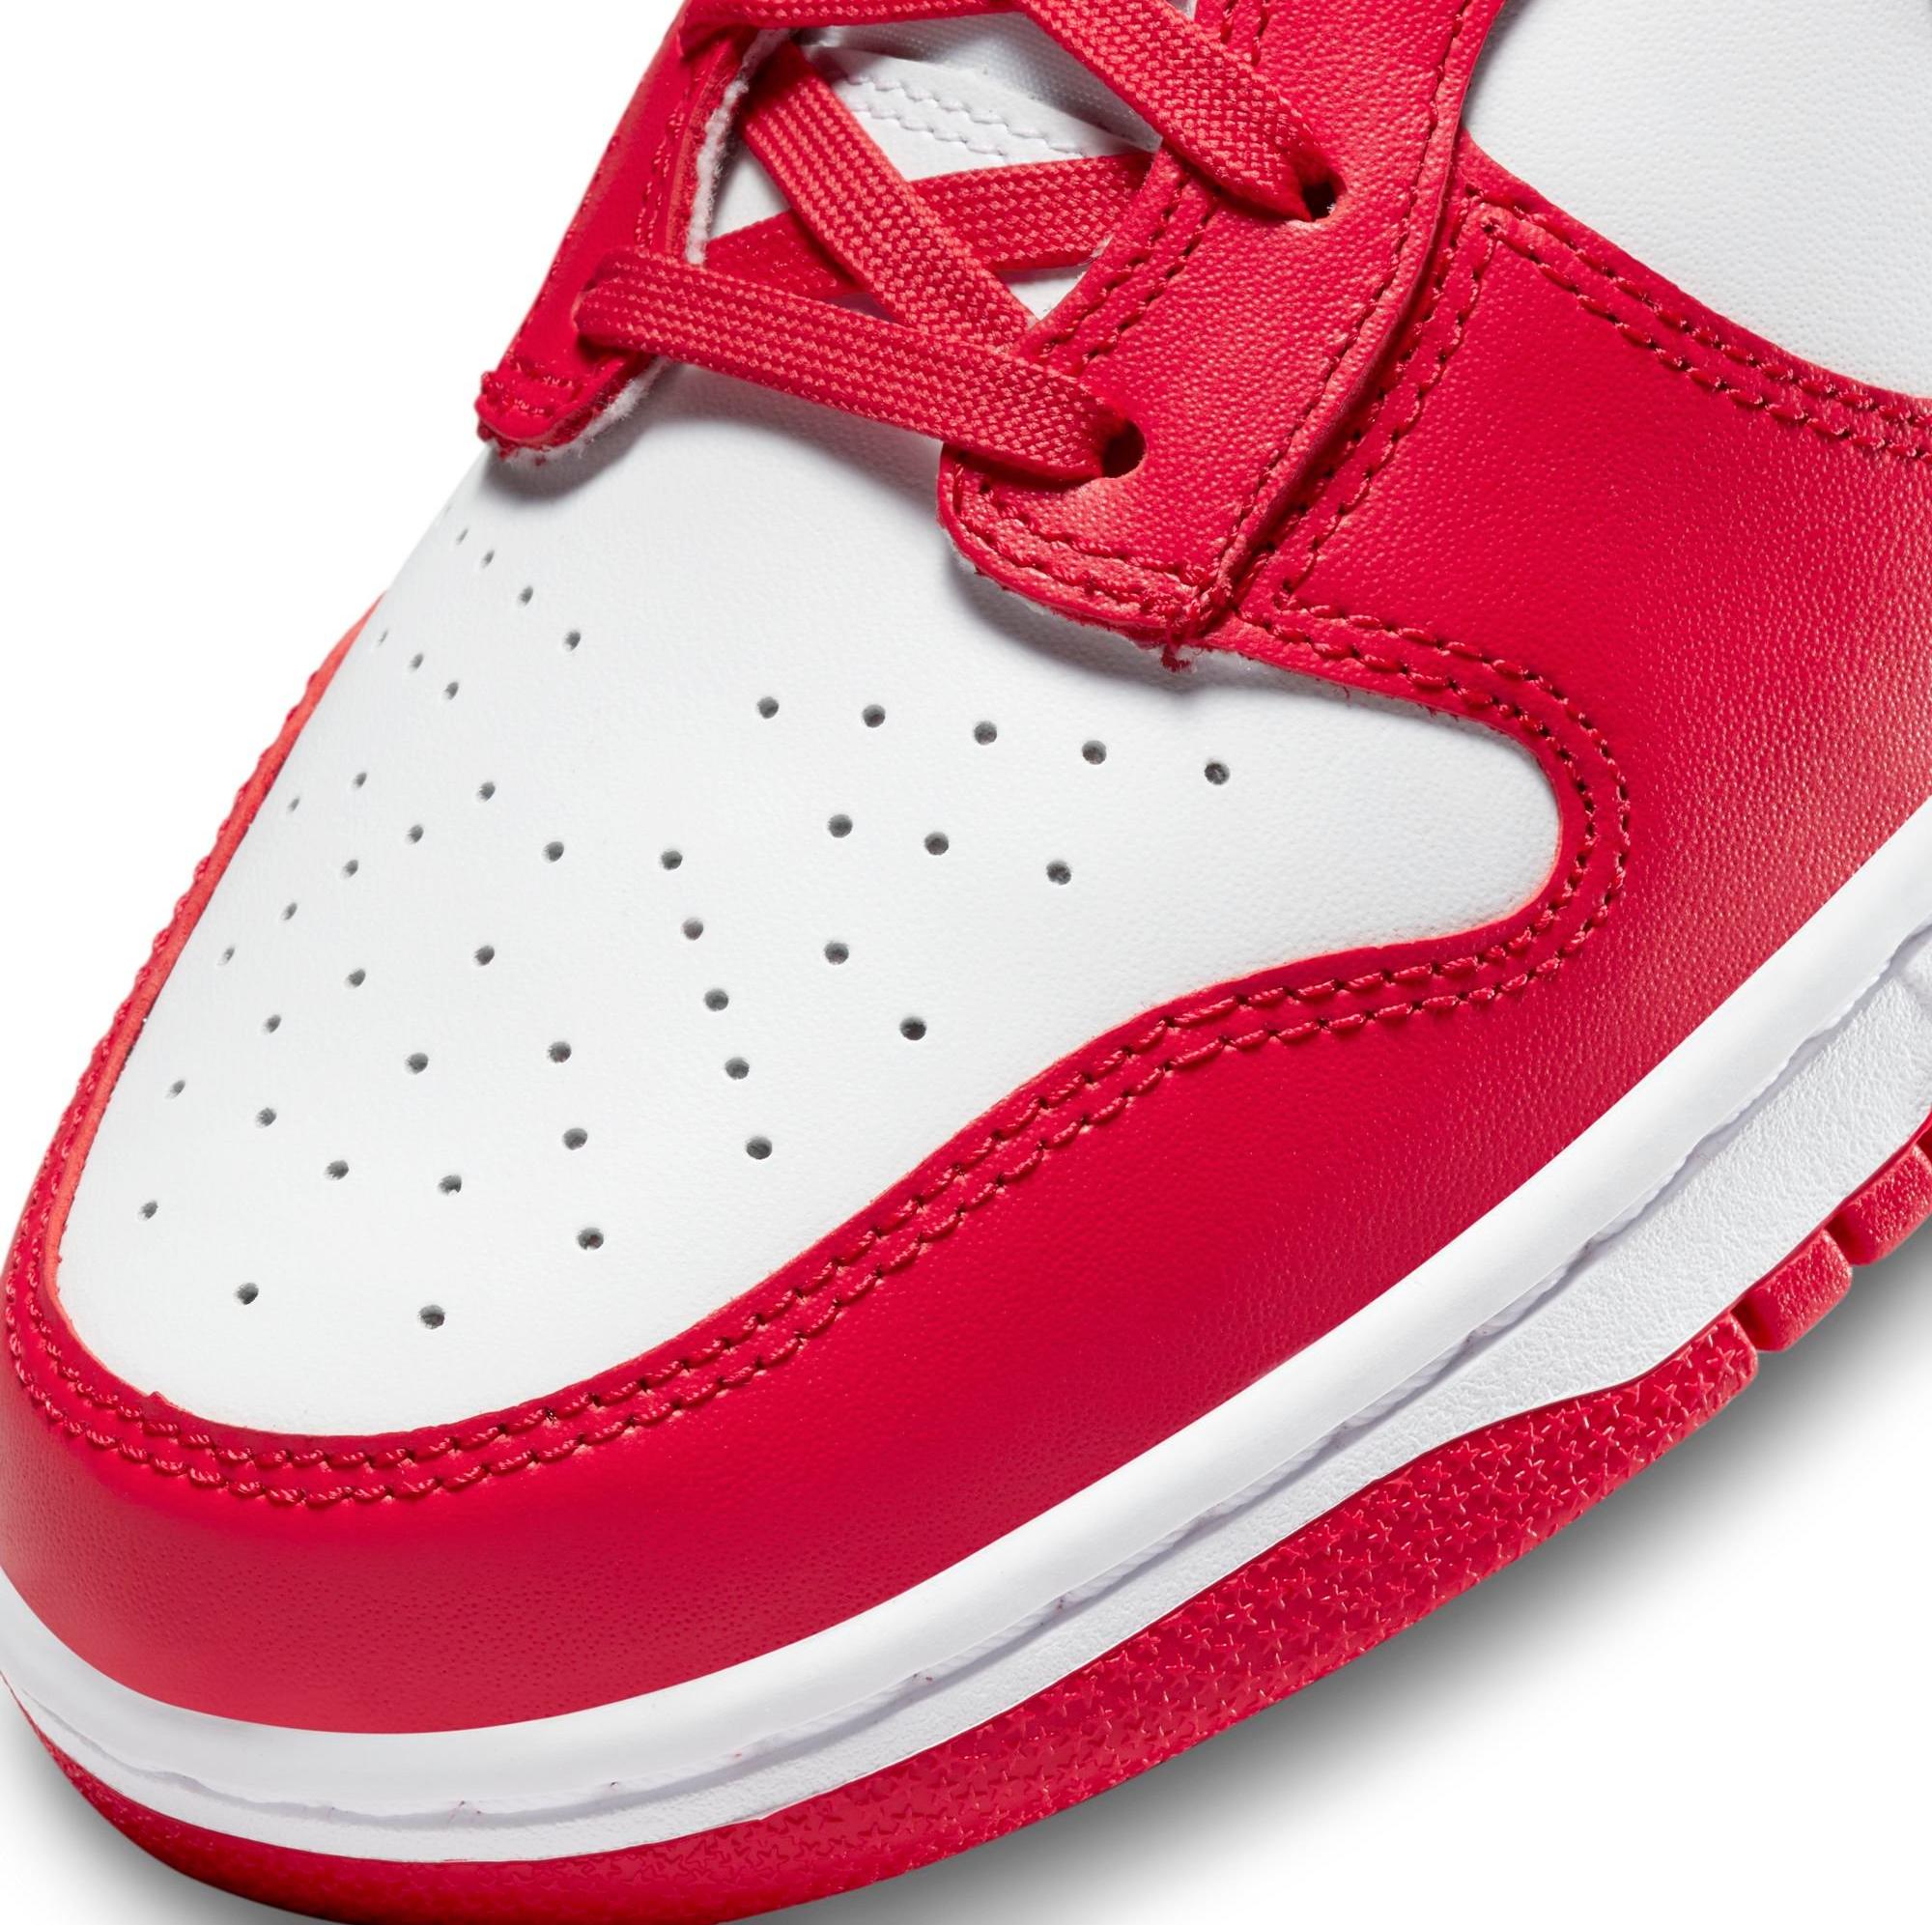 Sneakers Release – Nike Dunk High “White/University Red” & Nike 